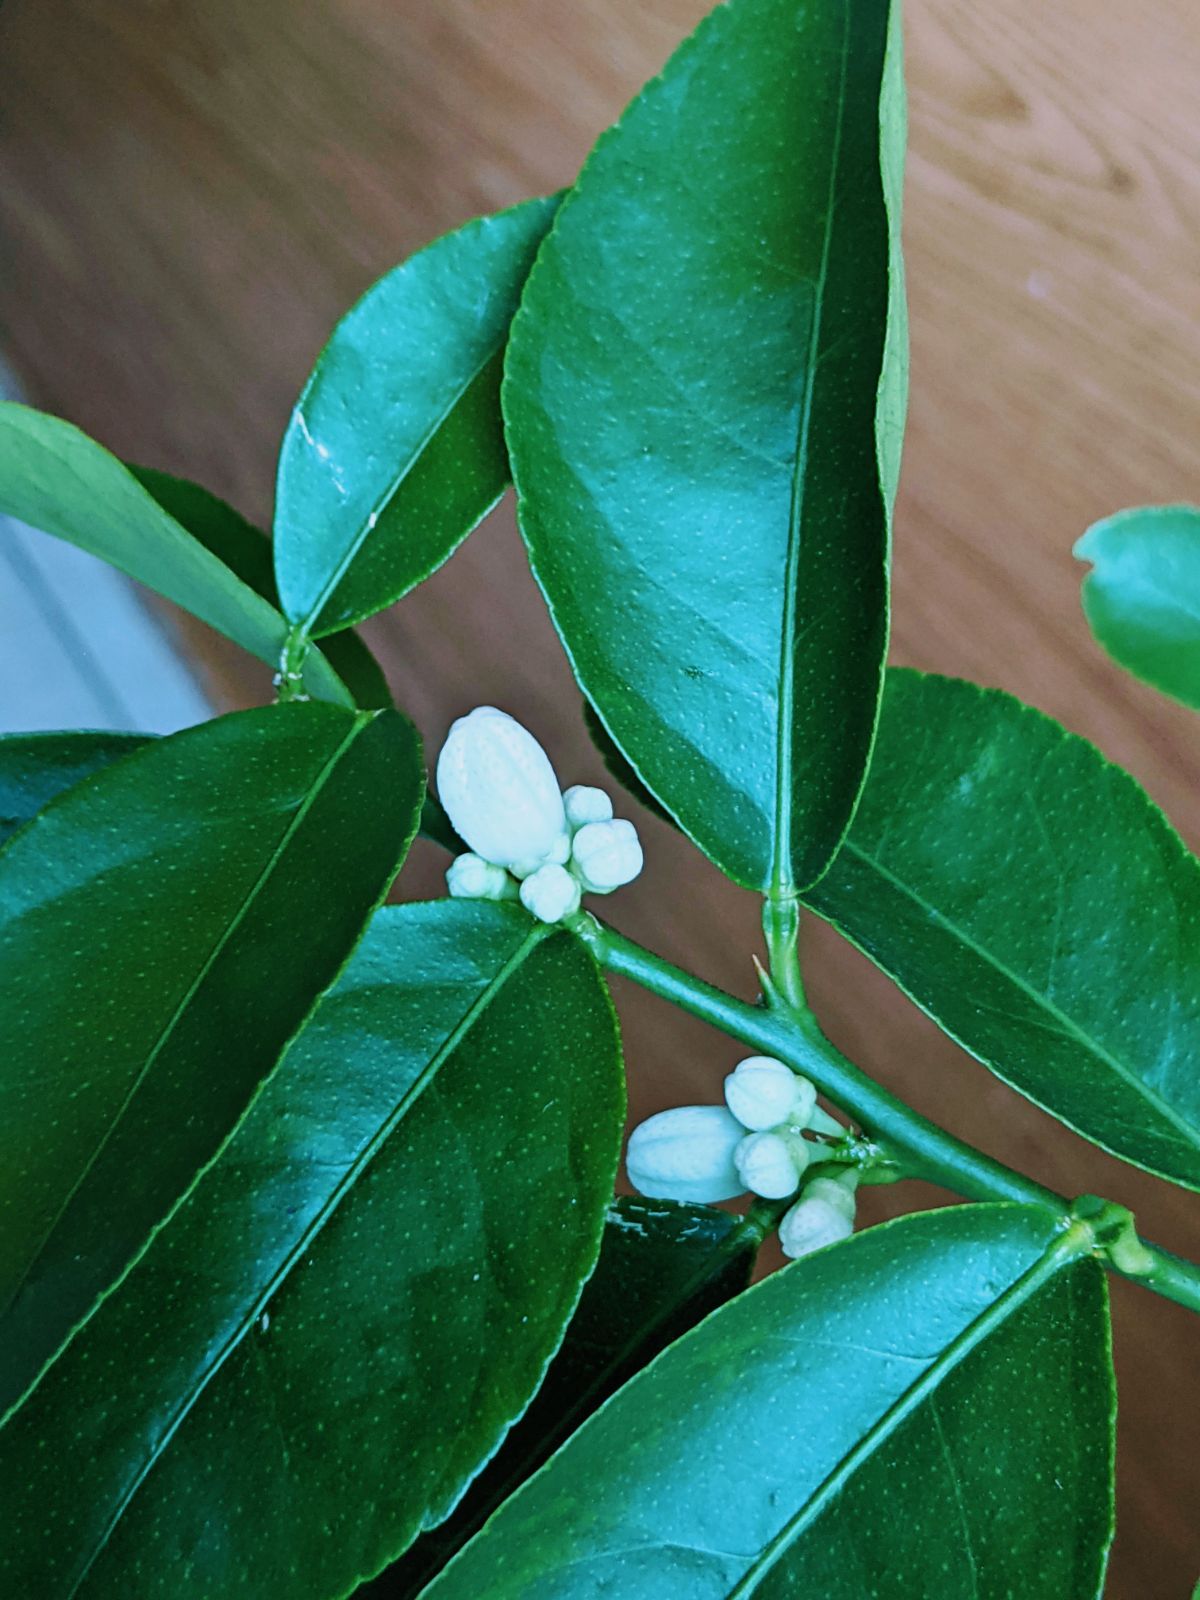 Our indoor lime tree loaded with fruiting flower buds